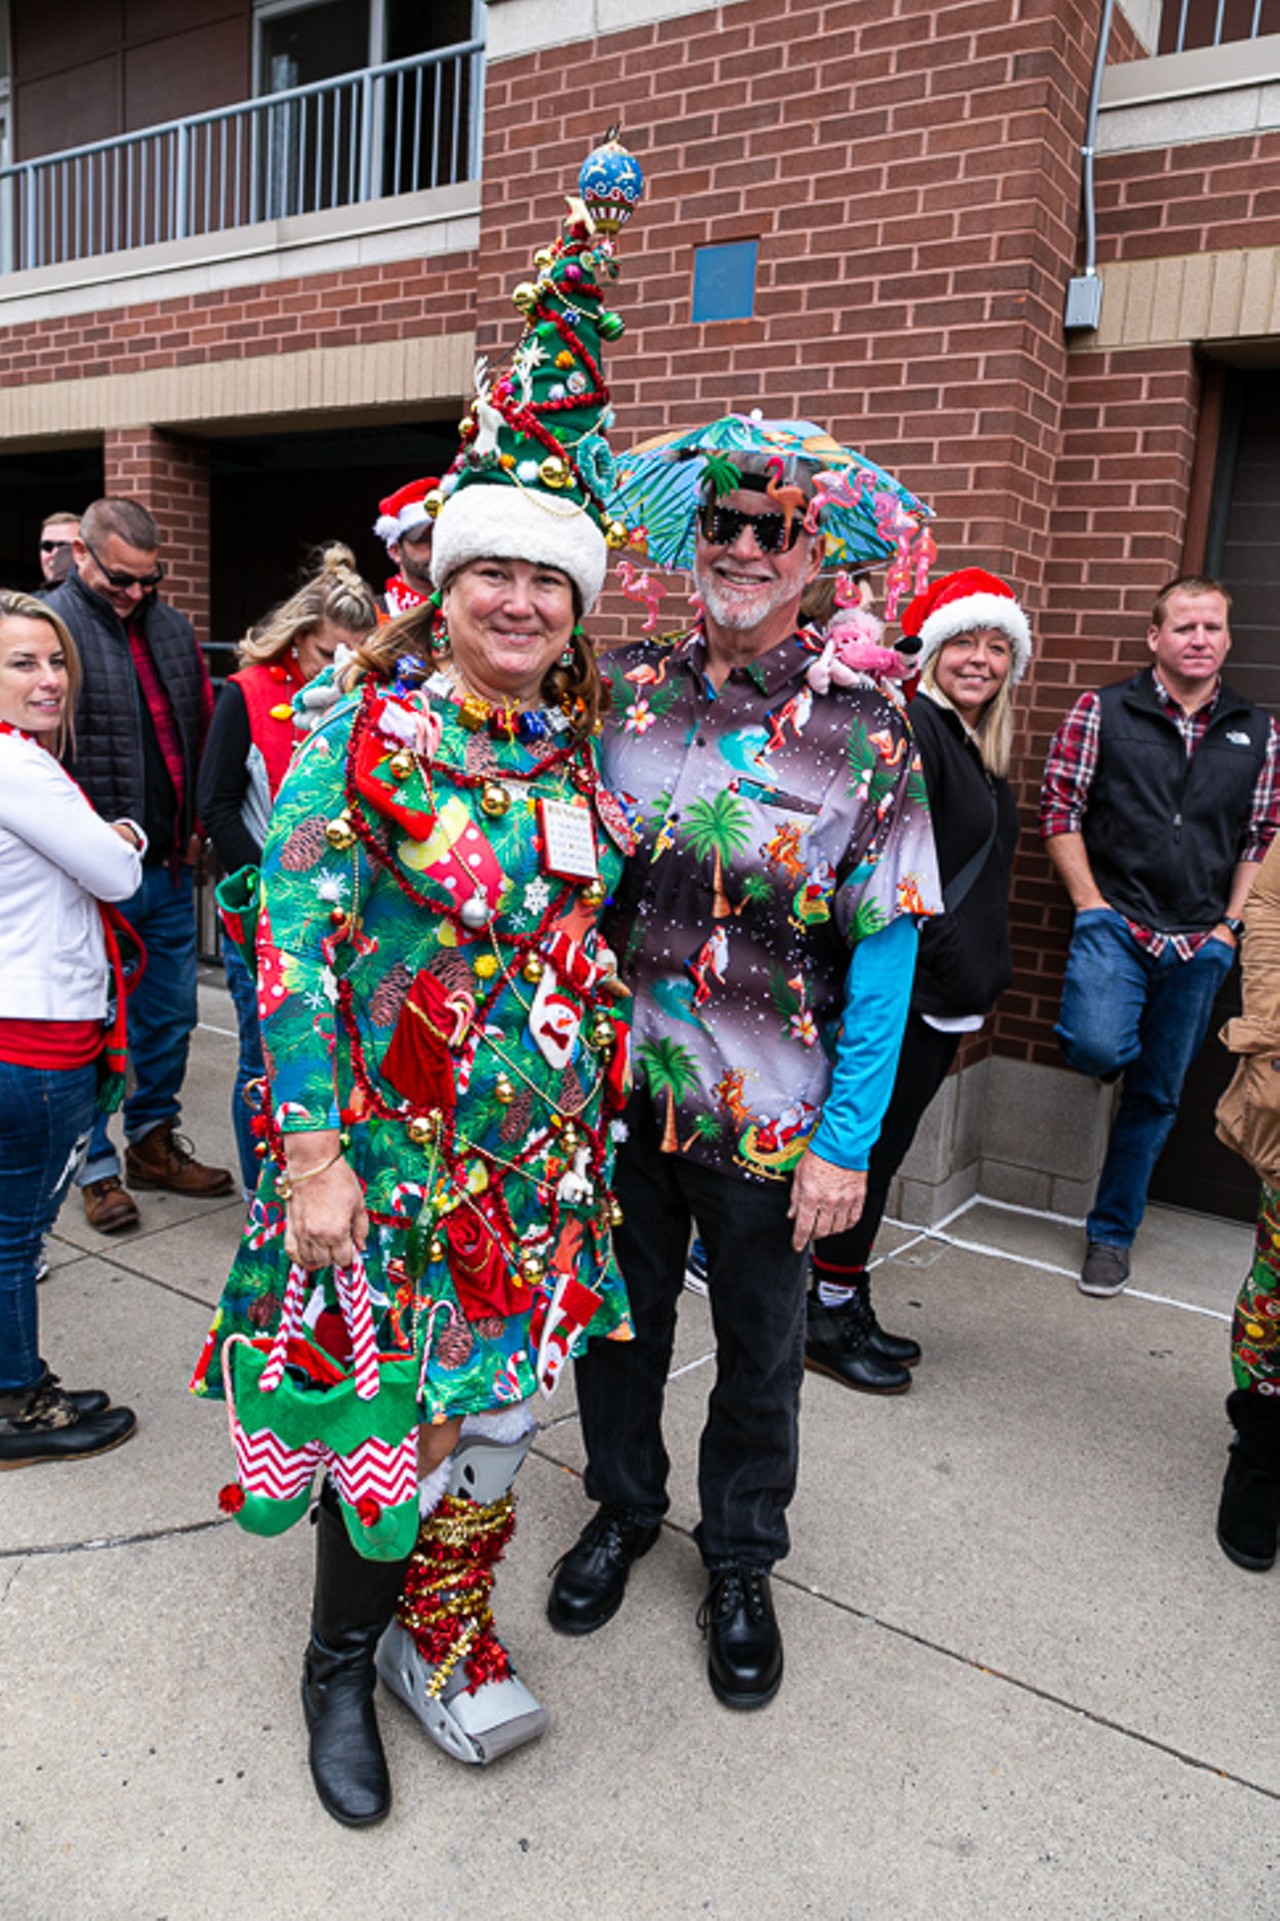 Festive Photos From the 2019 Christmas Ale First Pour at Great Lakes Brewing Co.